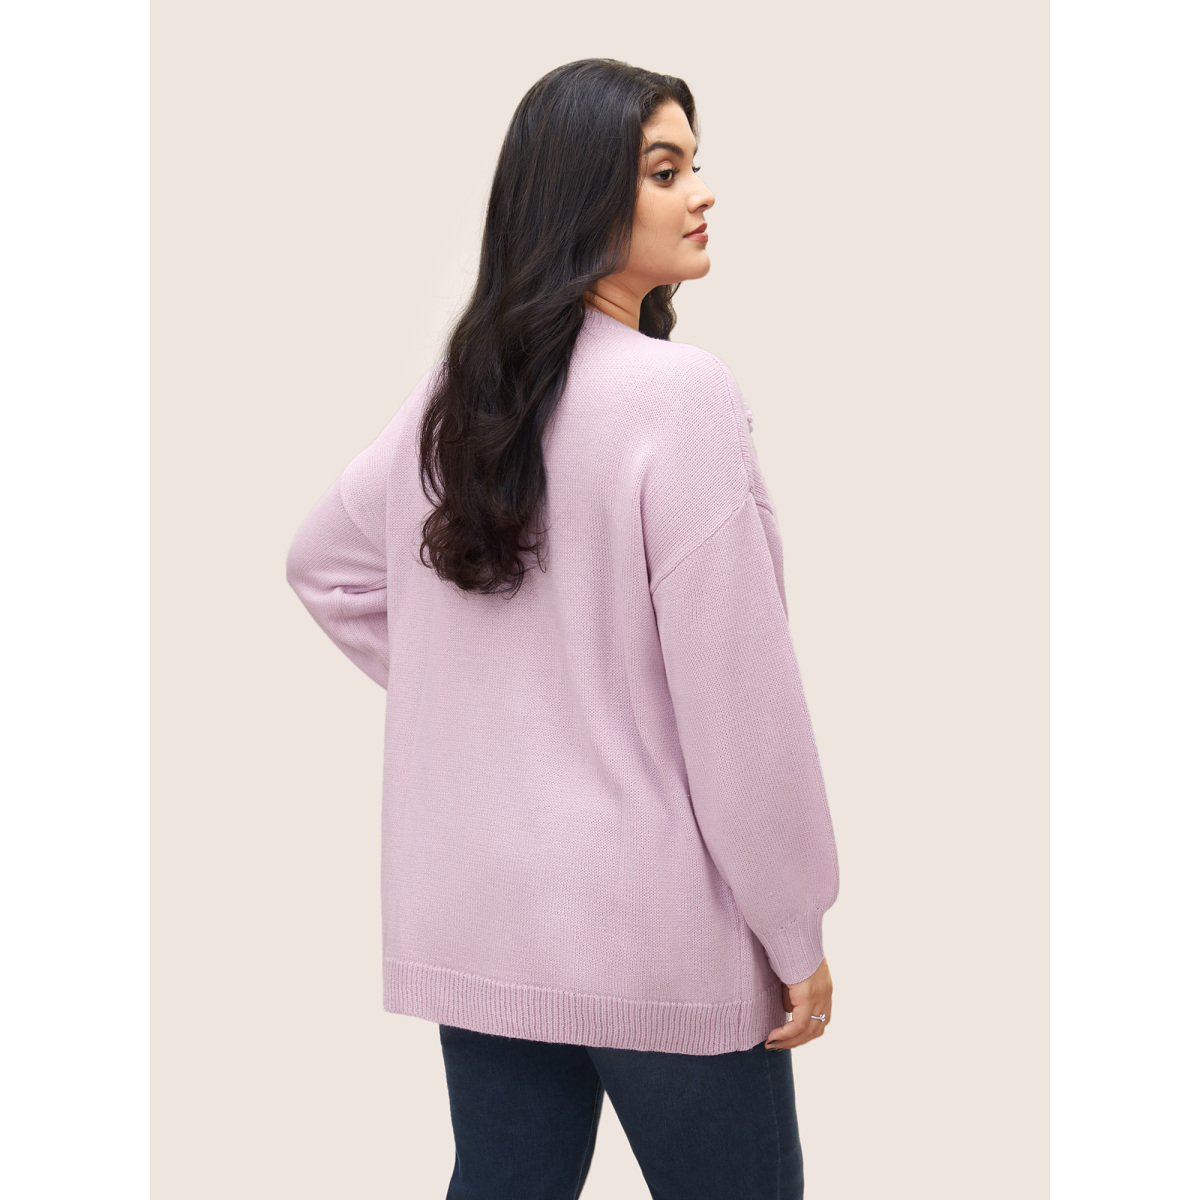 

Plus Size Stereo Flower Design Drop Shoulder Pullover Lilac Women Elegant Long Sleeve Round Neck Everyday Pullovers BloomChic